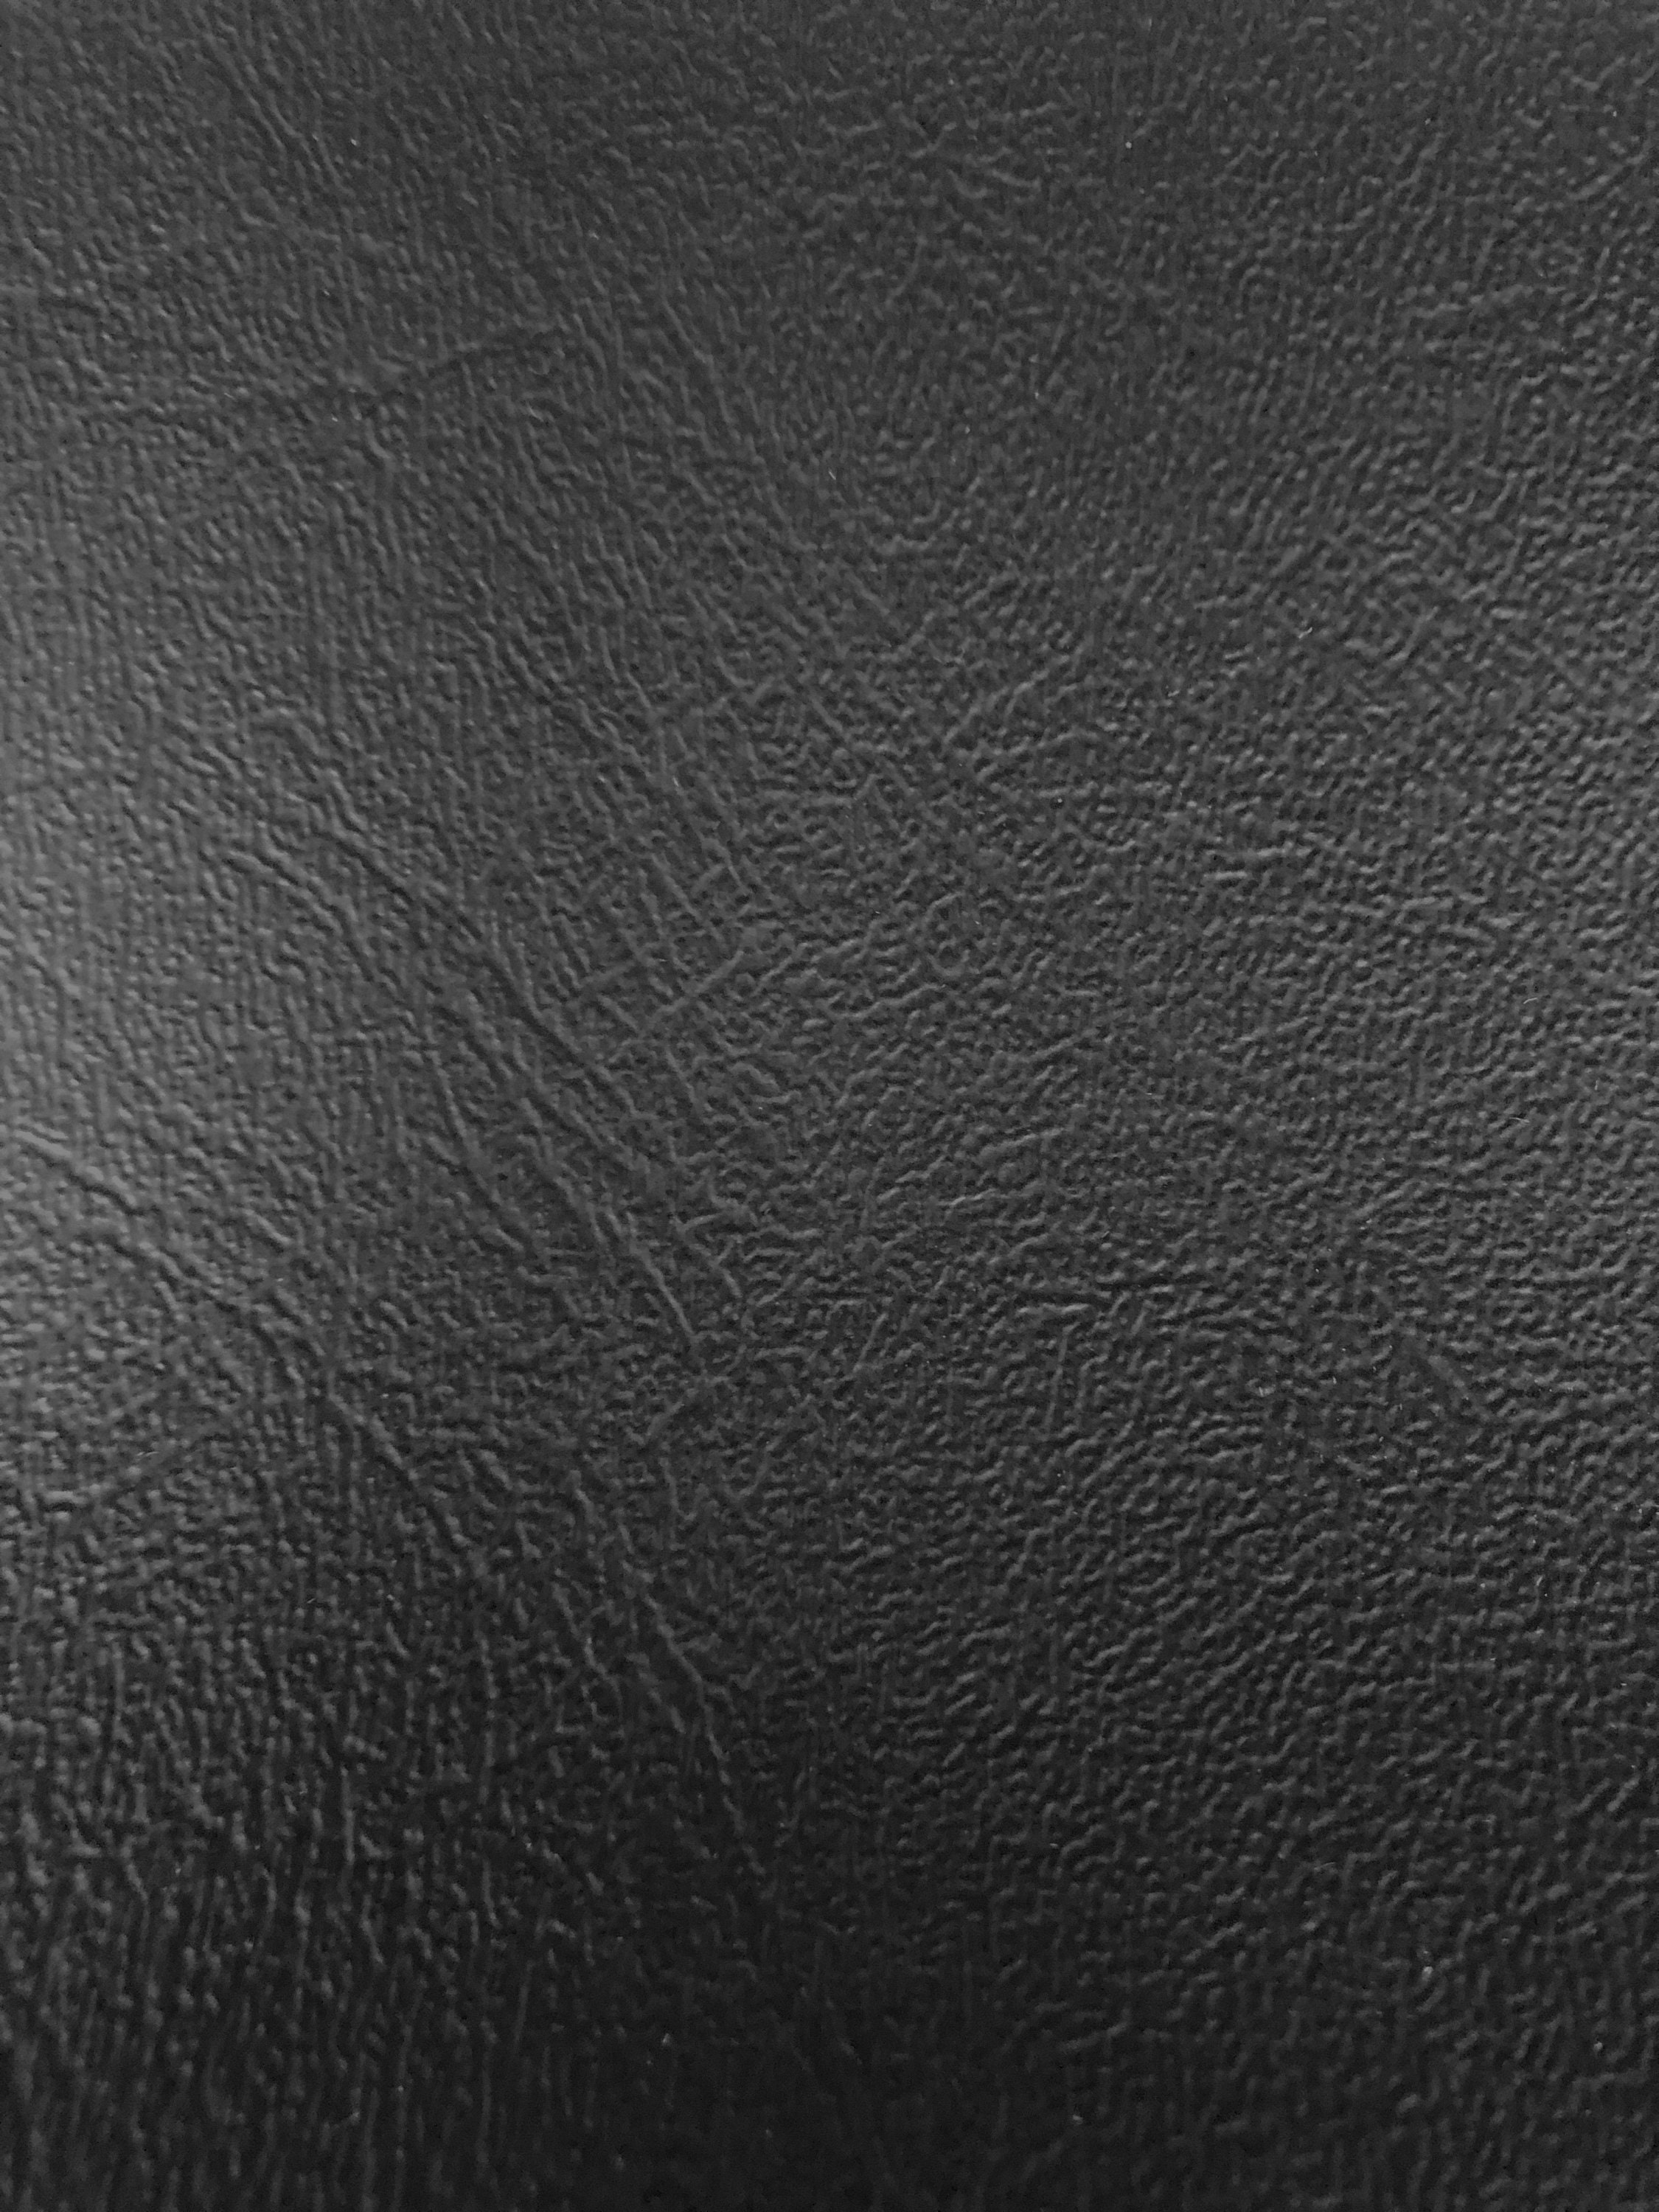 Black Blazer Heavy Duty Commercial Faux Leather Vinyl Fabric - Sold By The  Yard - 54